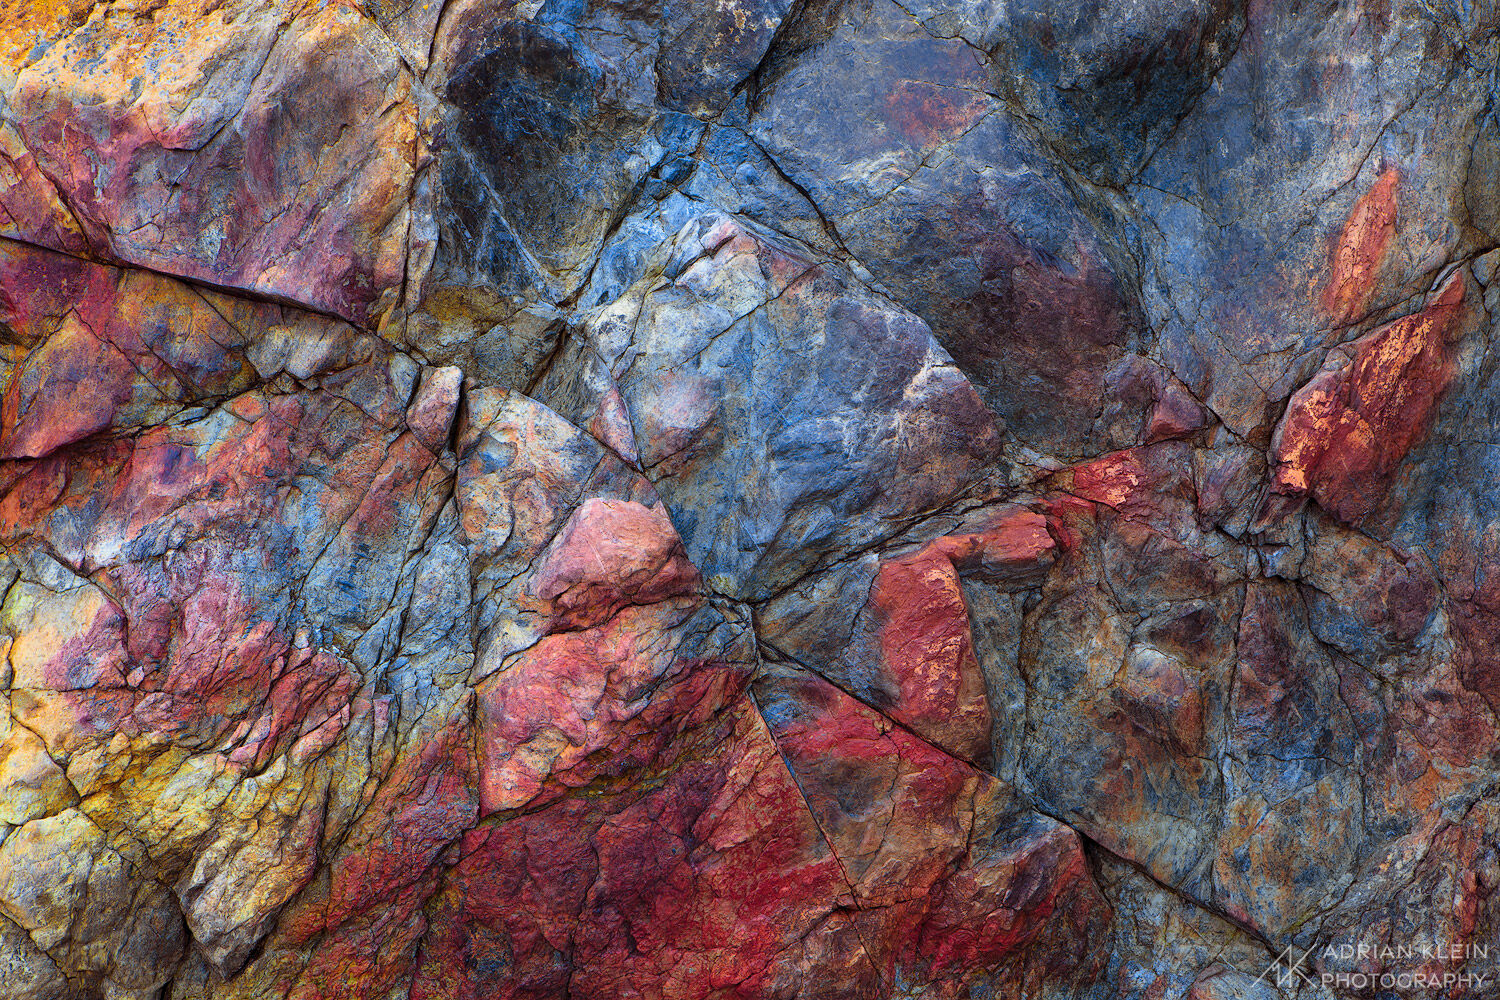 A wide array of colors and in one large rough boulder along the Central Oregon Coast.